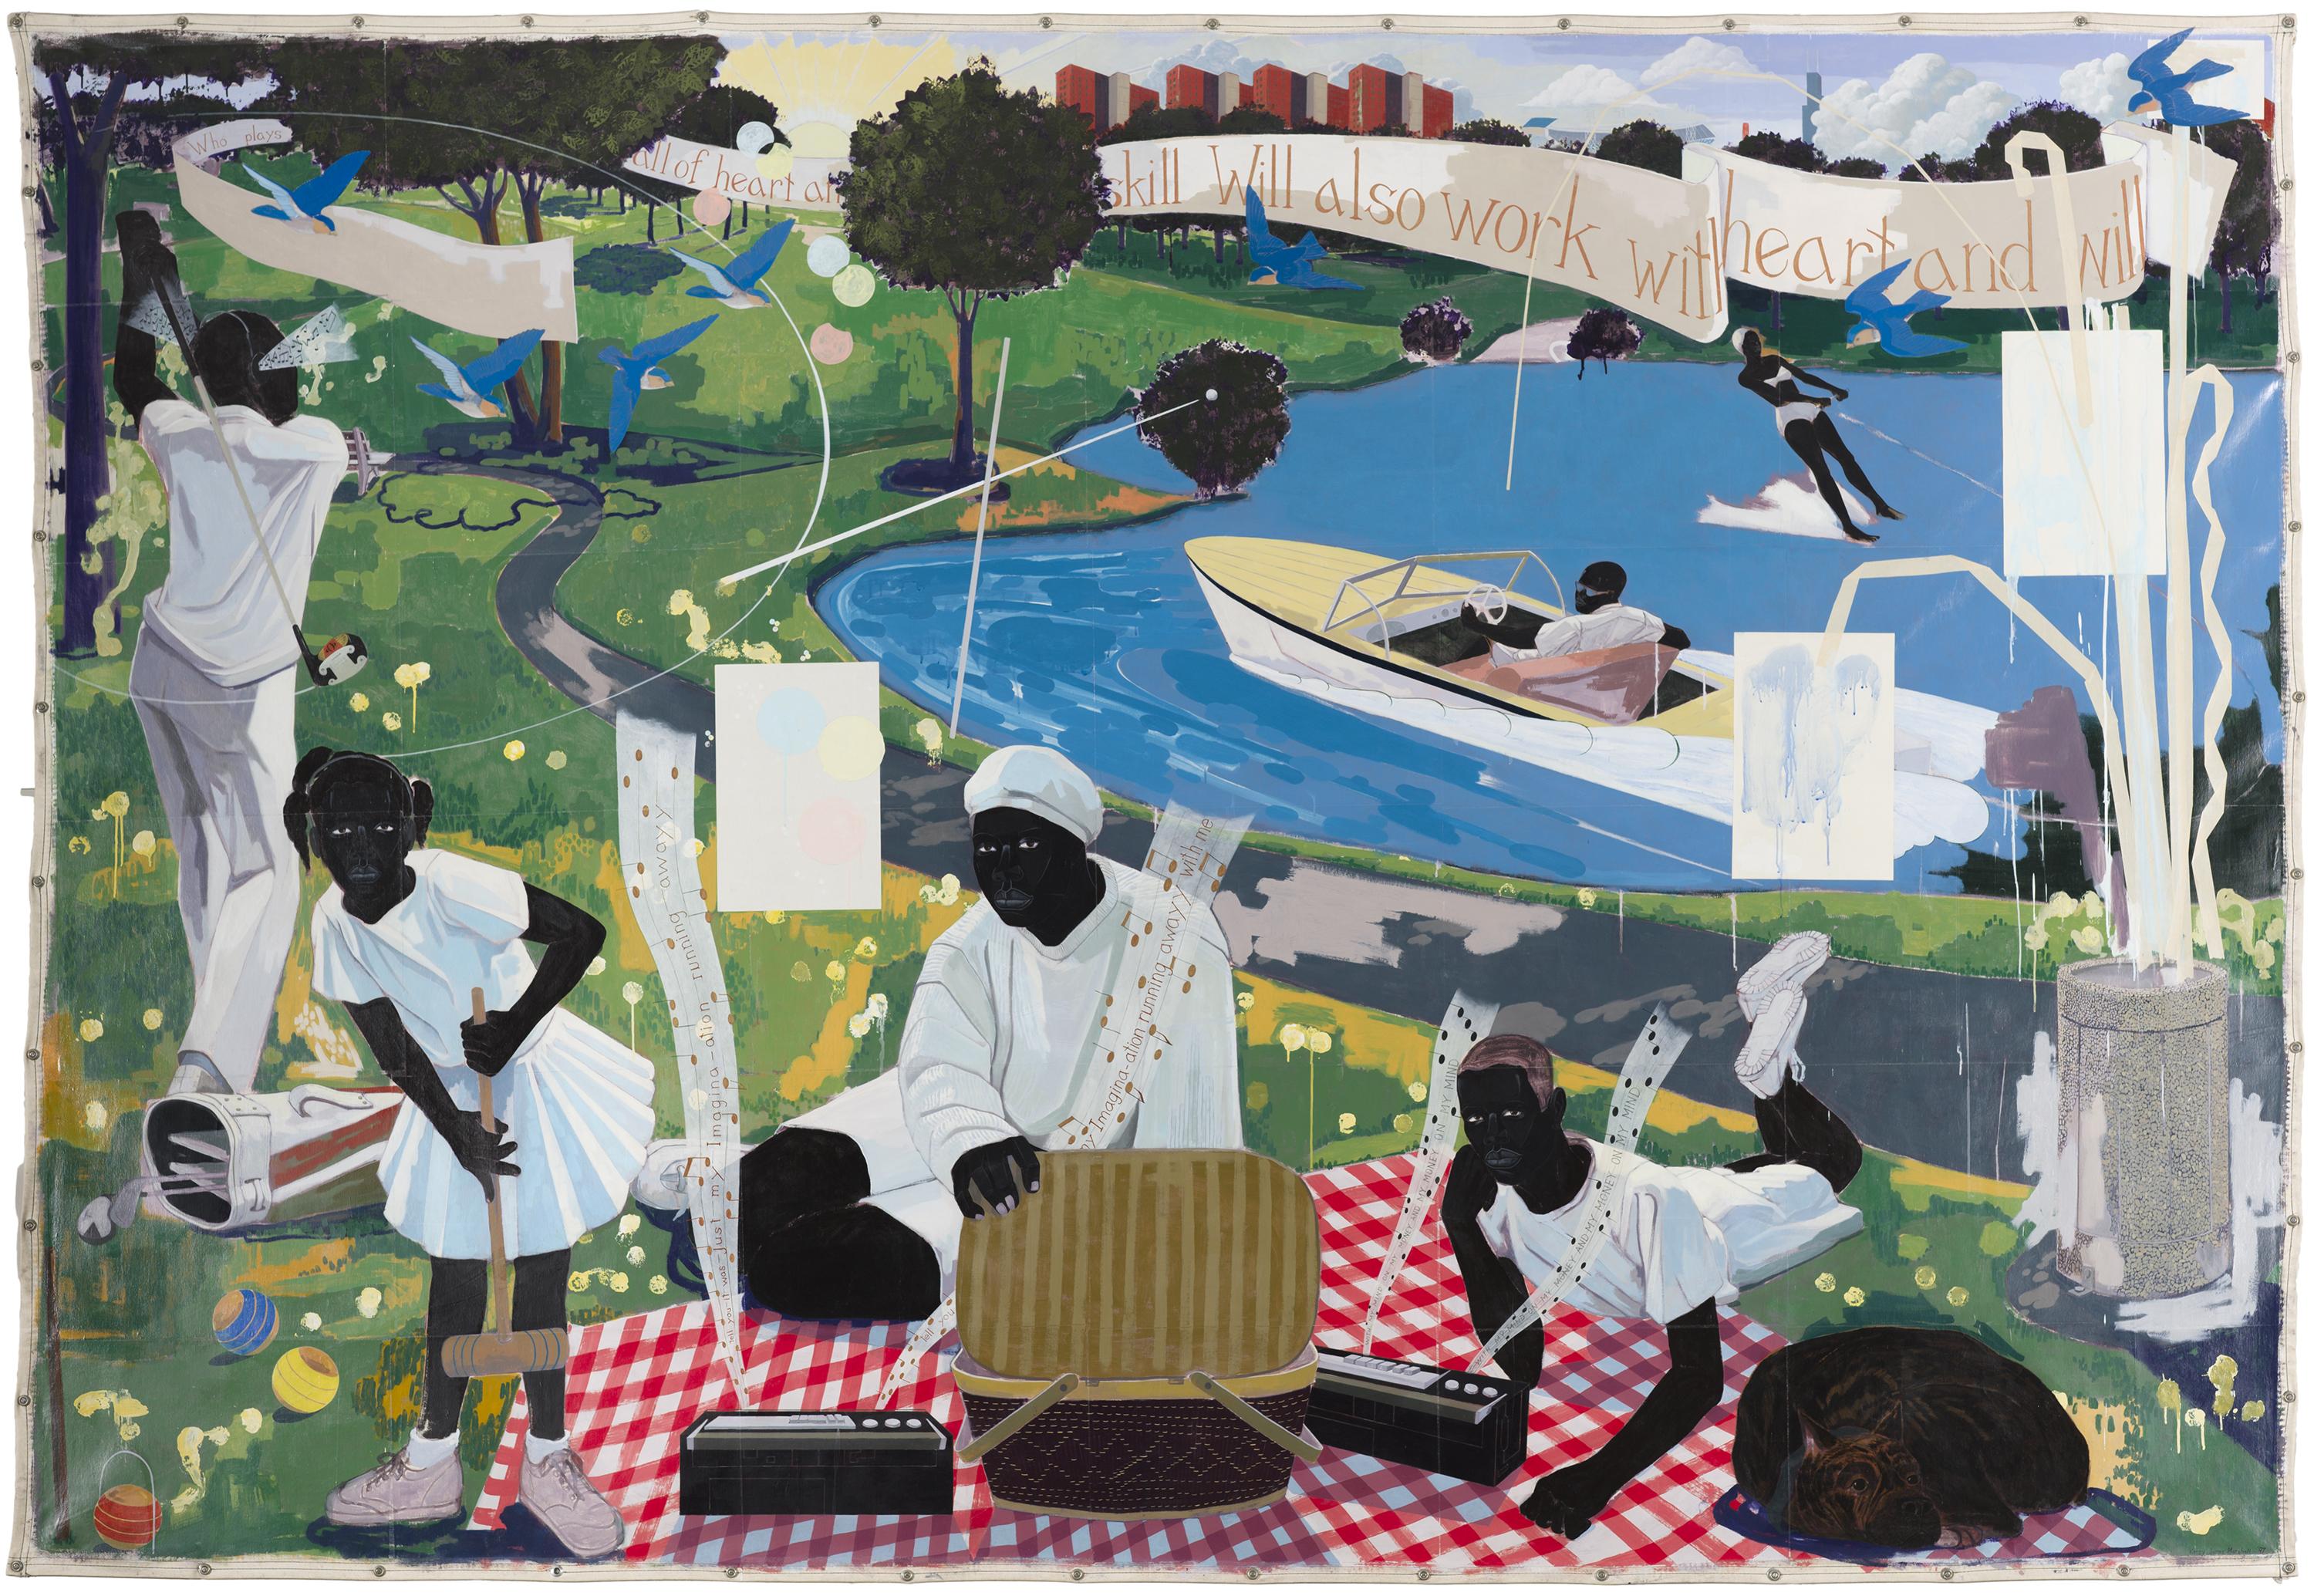 Image of a painting on stretched canvas hung by grommets that depicts a black family having a picnic in a park with others boat skiing and golfing in the background with the city seen in the distance.